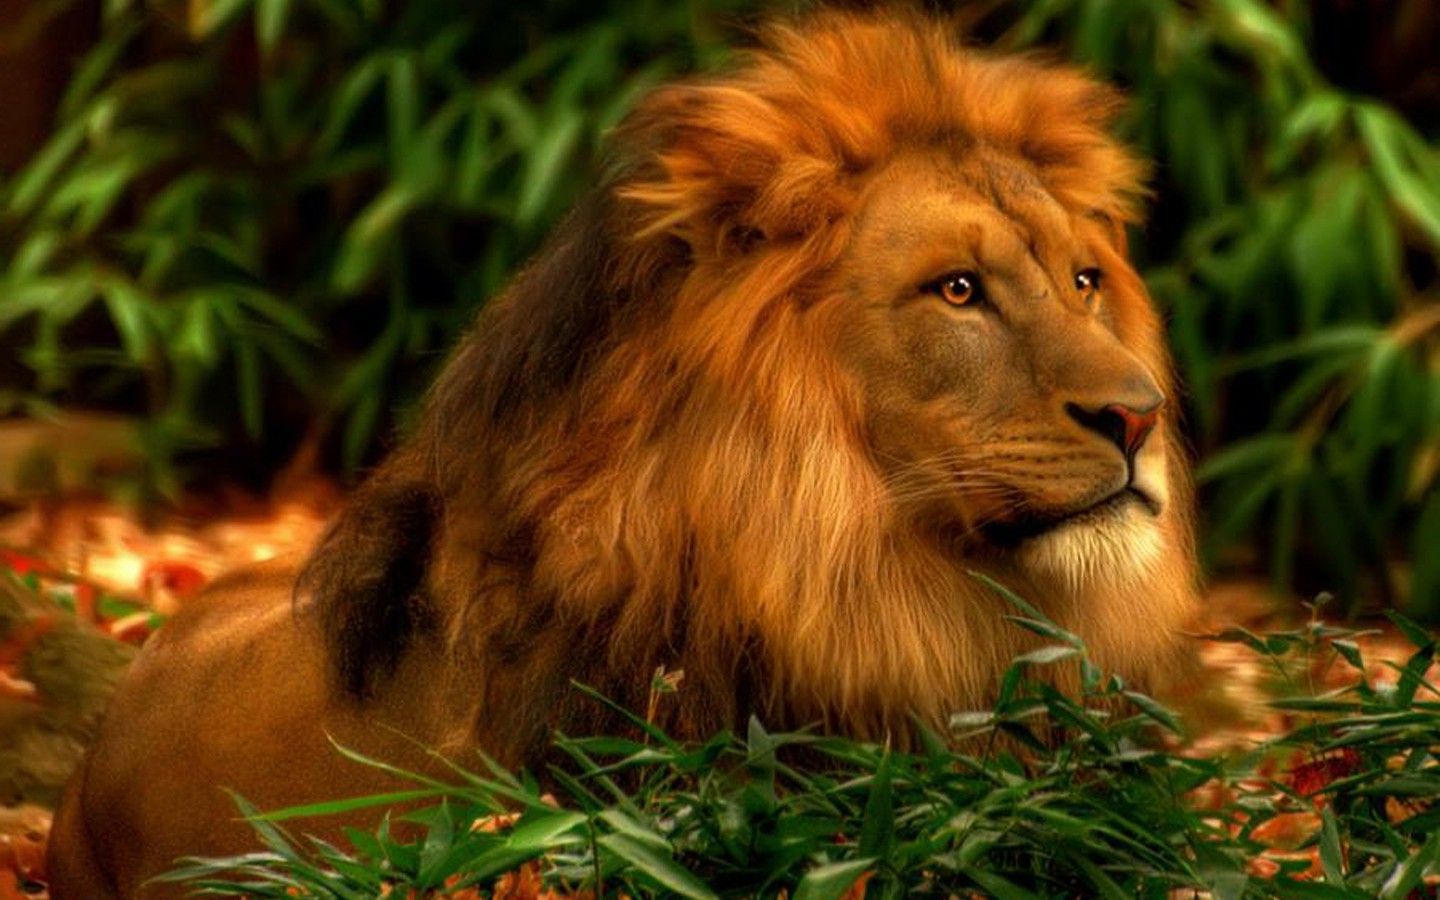 HD Wallpapers Lion Group (86+)